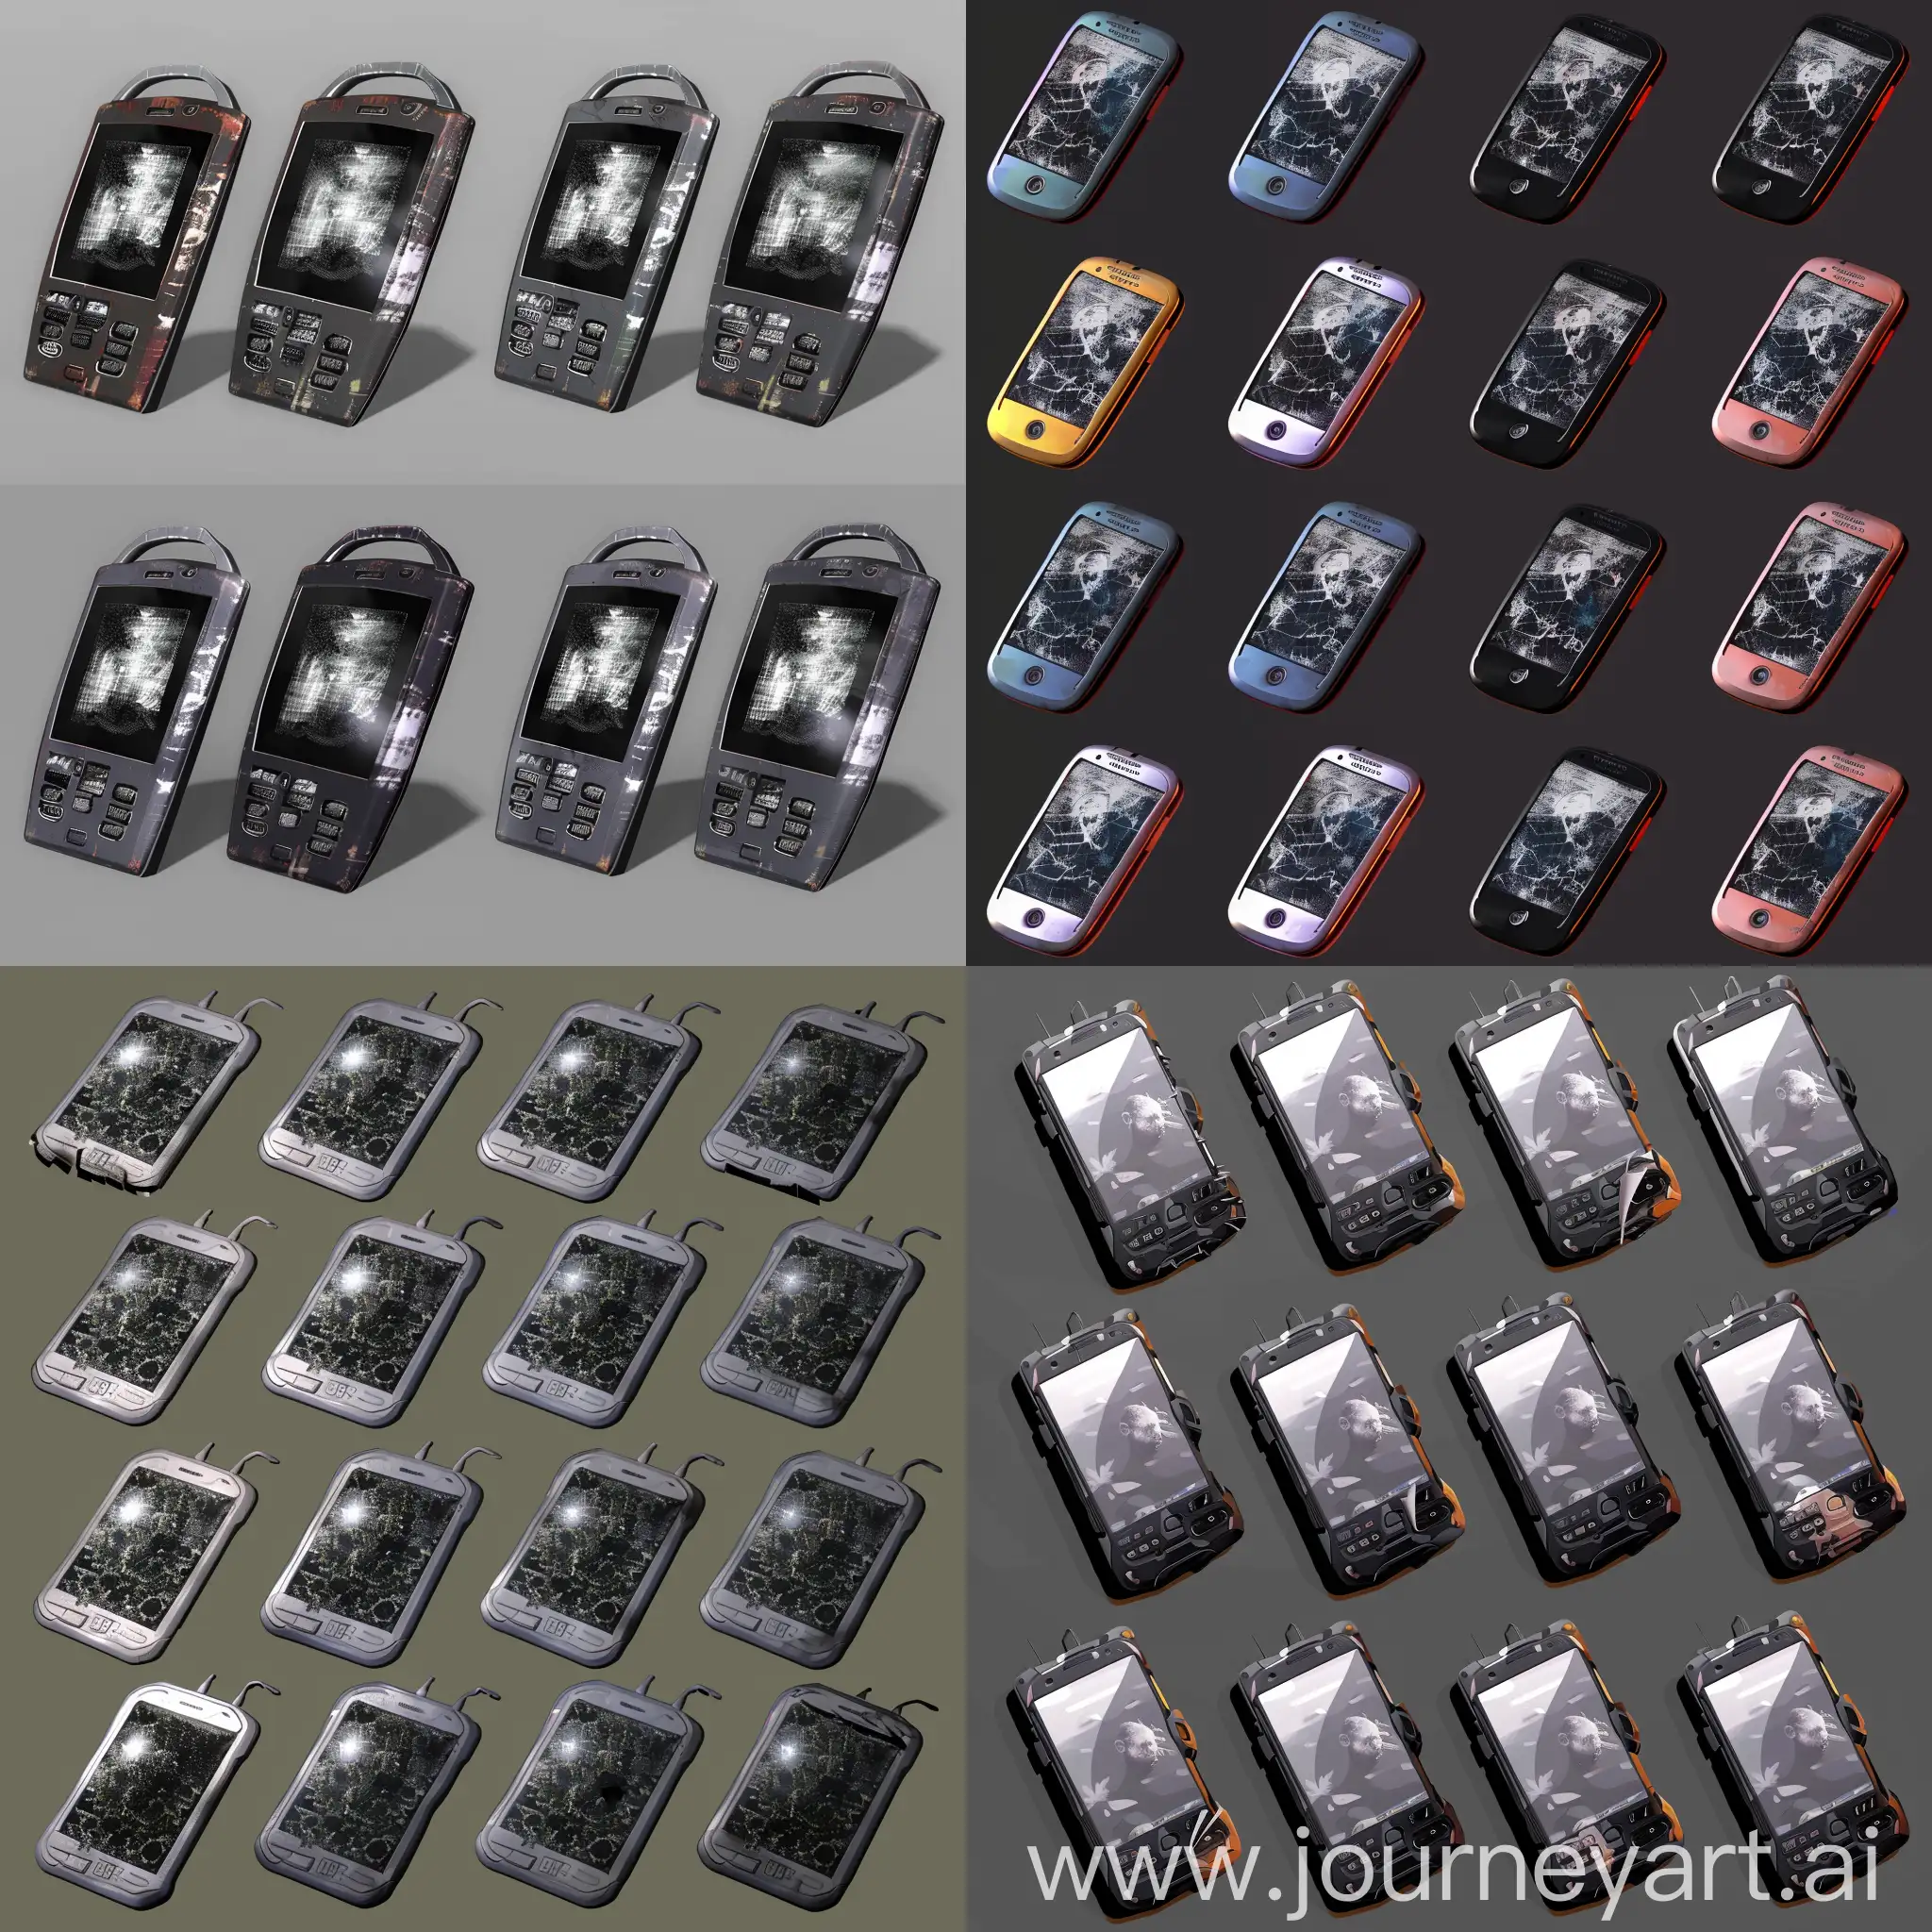 https://i.postimg.cc/YCStjdbR/image.png realistic photo of isometric set of worn pda, style of stalker game, unreal engine 5 render, ultrarealistic style, isometric set --iw 2 --chaos 30